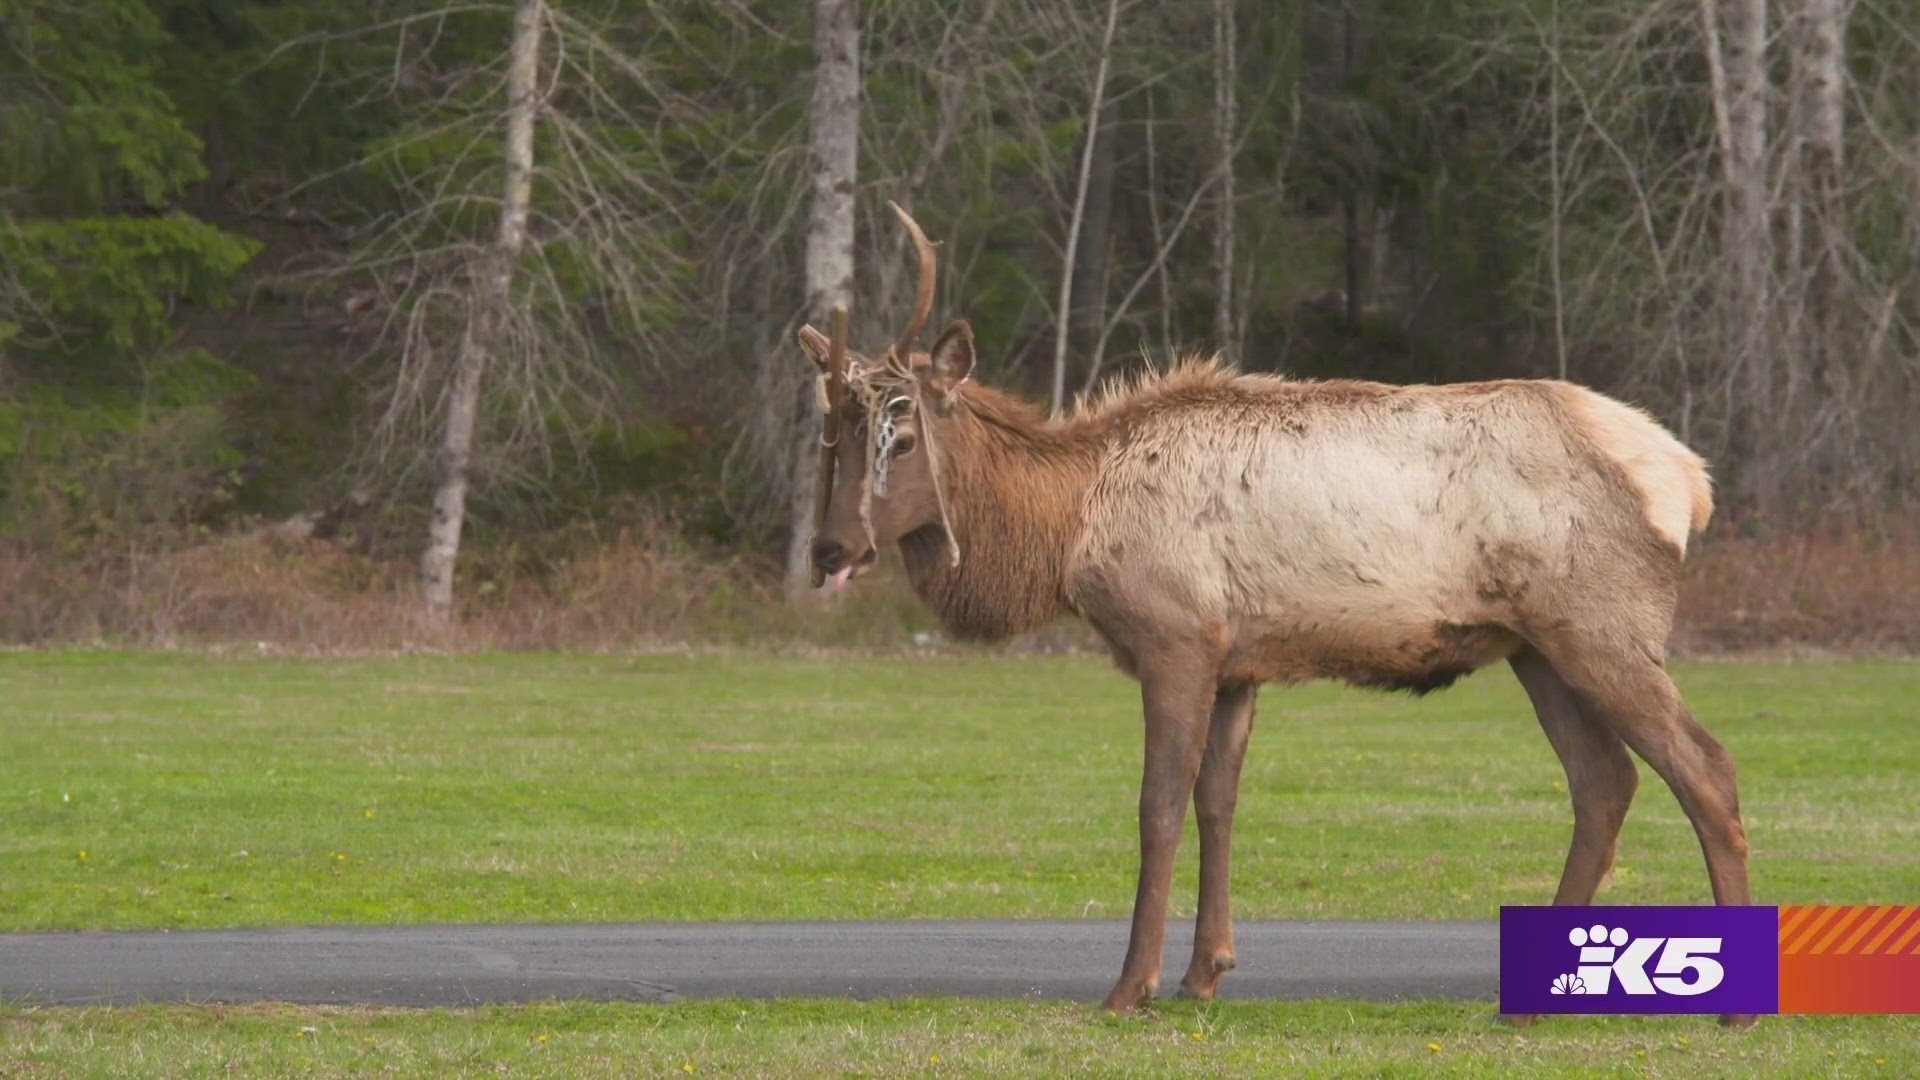 This Packwood community has just one wish for Hammock Head the elk: That he lose his antlers and finally break free. #k5evening